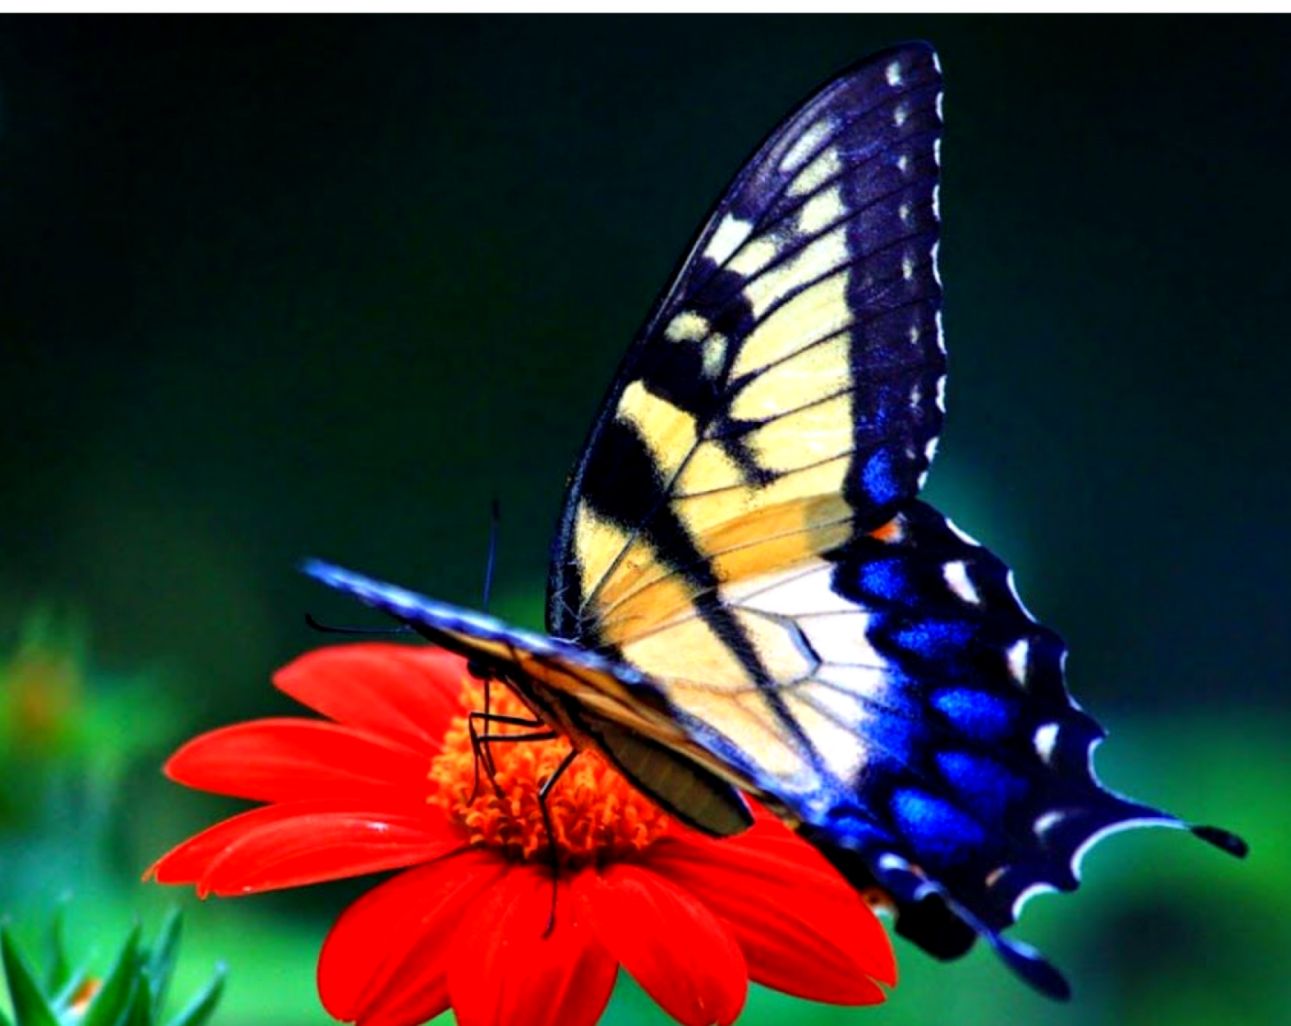 55 Colorful 【butterfly】hd Free Images Wallpapers Download - Beautiful Wallpapers Of Butterflies Hd - HD Wallpaper 